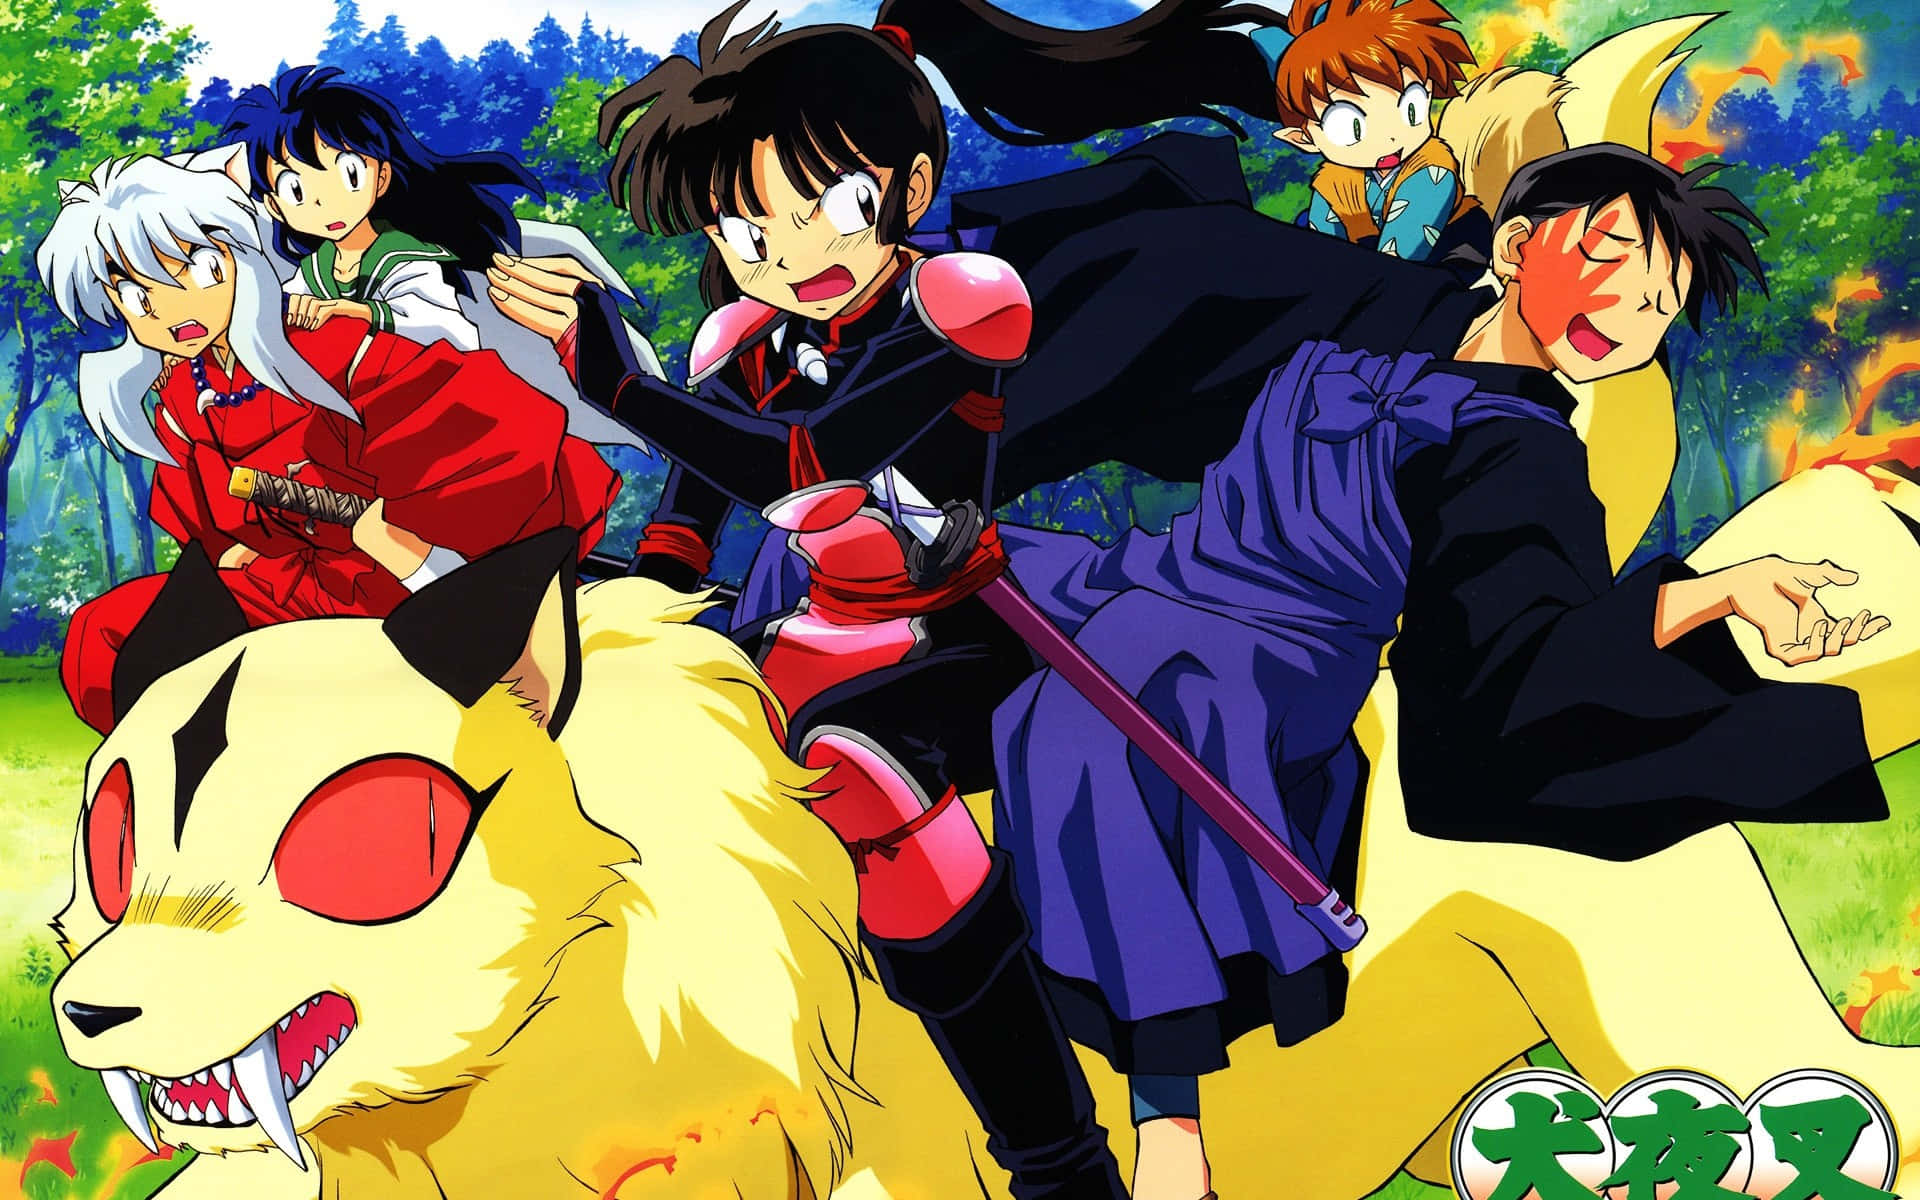 An adventurous moment with Inuyasha and the gang Wallpaper